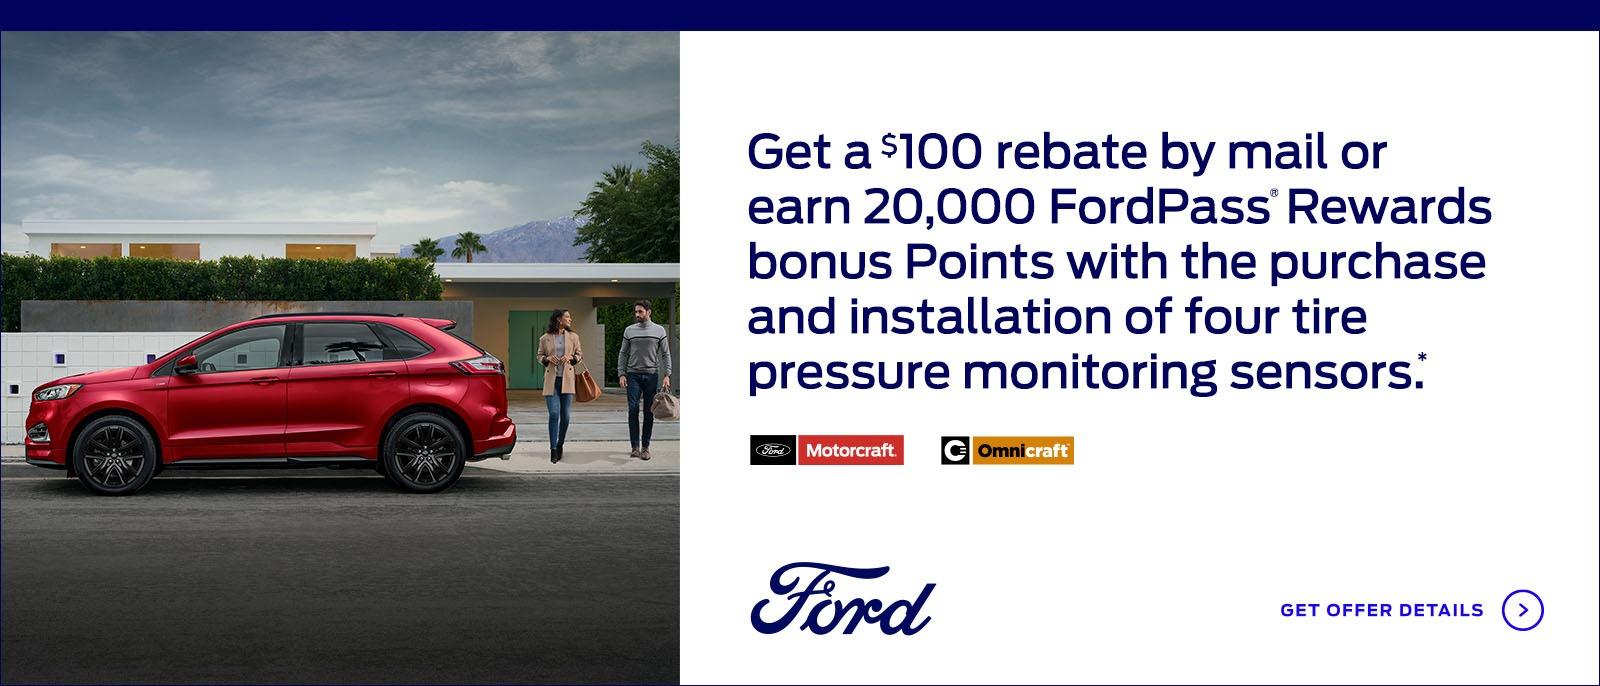 Get a $100 rebate by mail or earn 20,000 FordPass® Rewards bonus Points with the purchase and installation of four tire pressure monitoring sensors. *